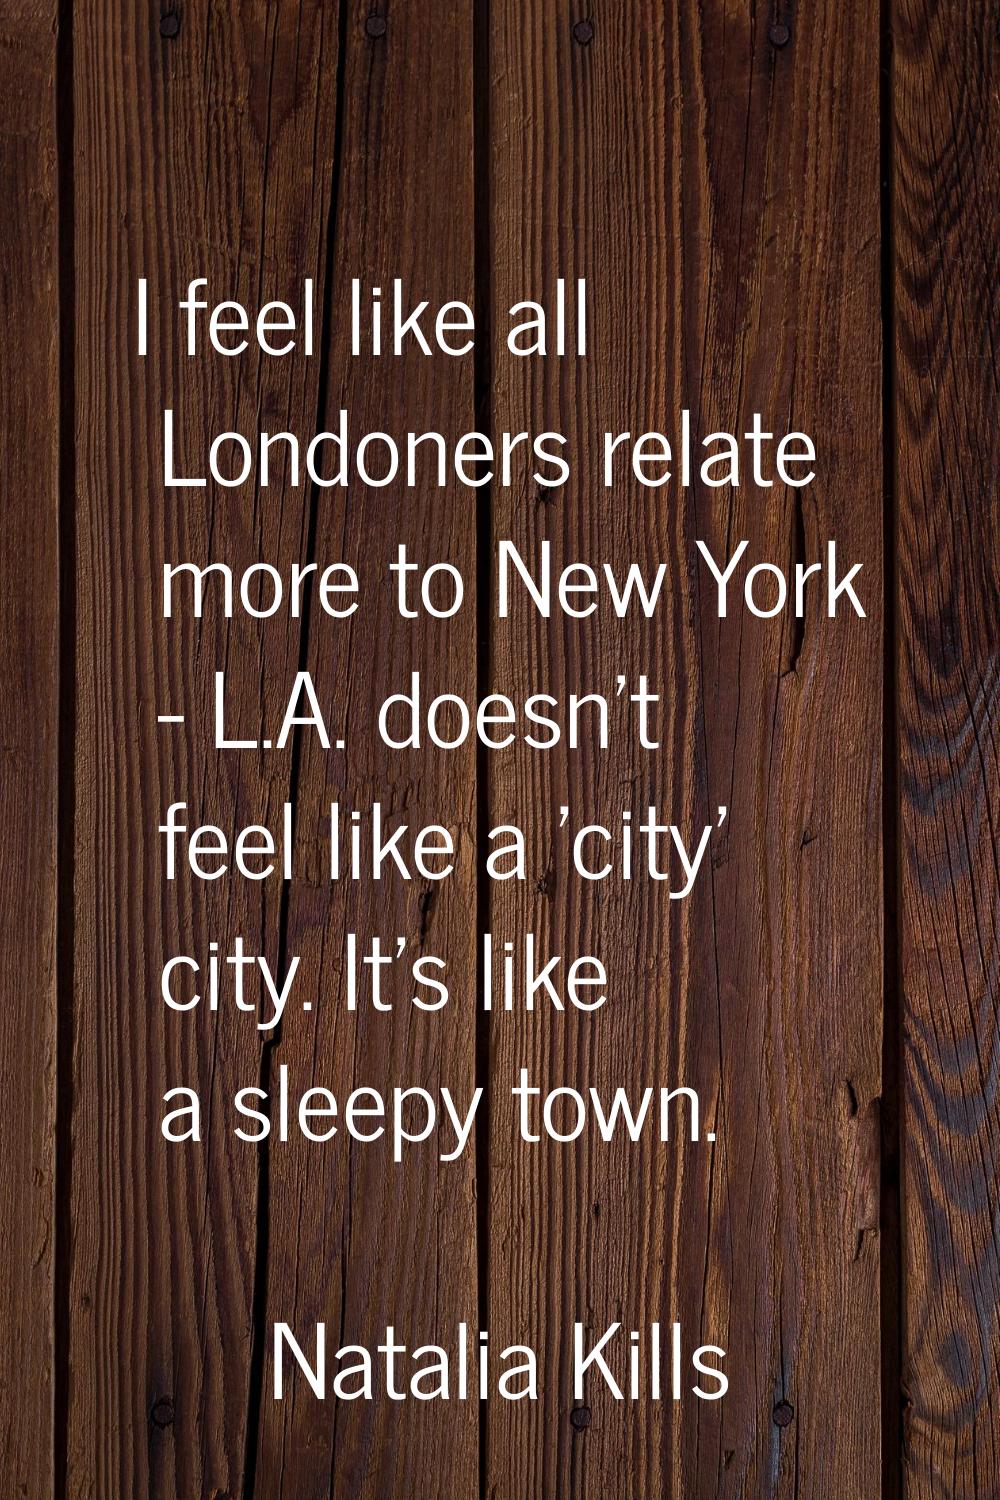 I feel like all Londoners relate more to New York - L.A. doesn't feel like a 'city' city. It's like